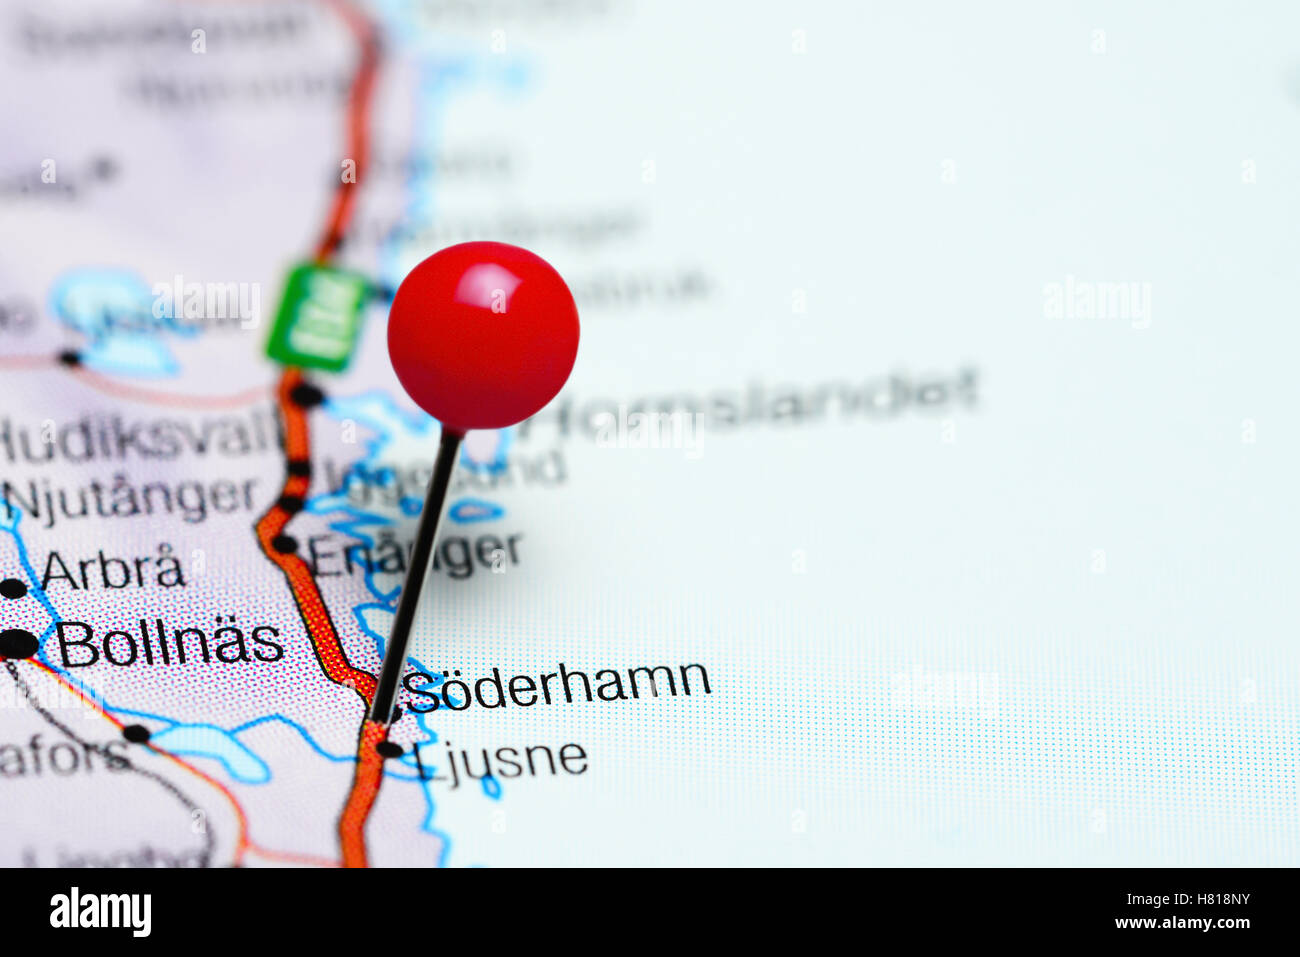 Soderhamn pinned on a map of Sweden Stock Photo